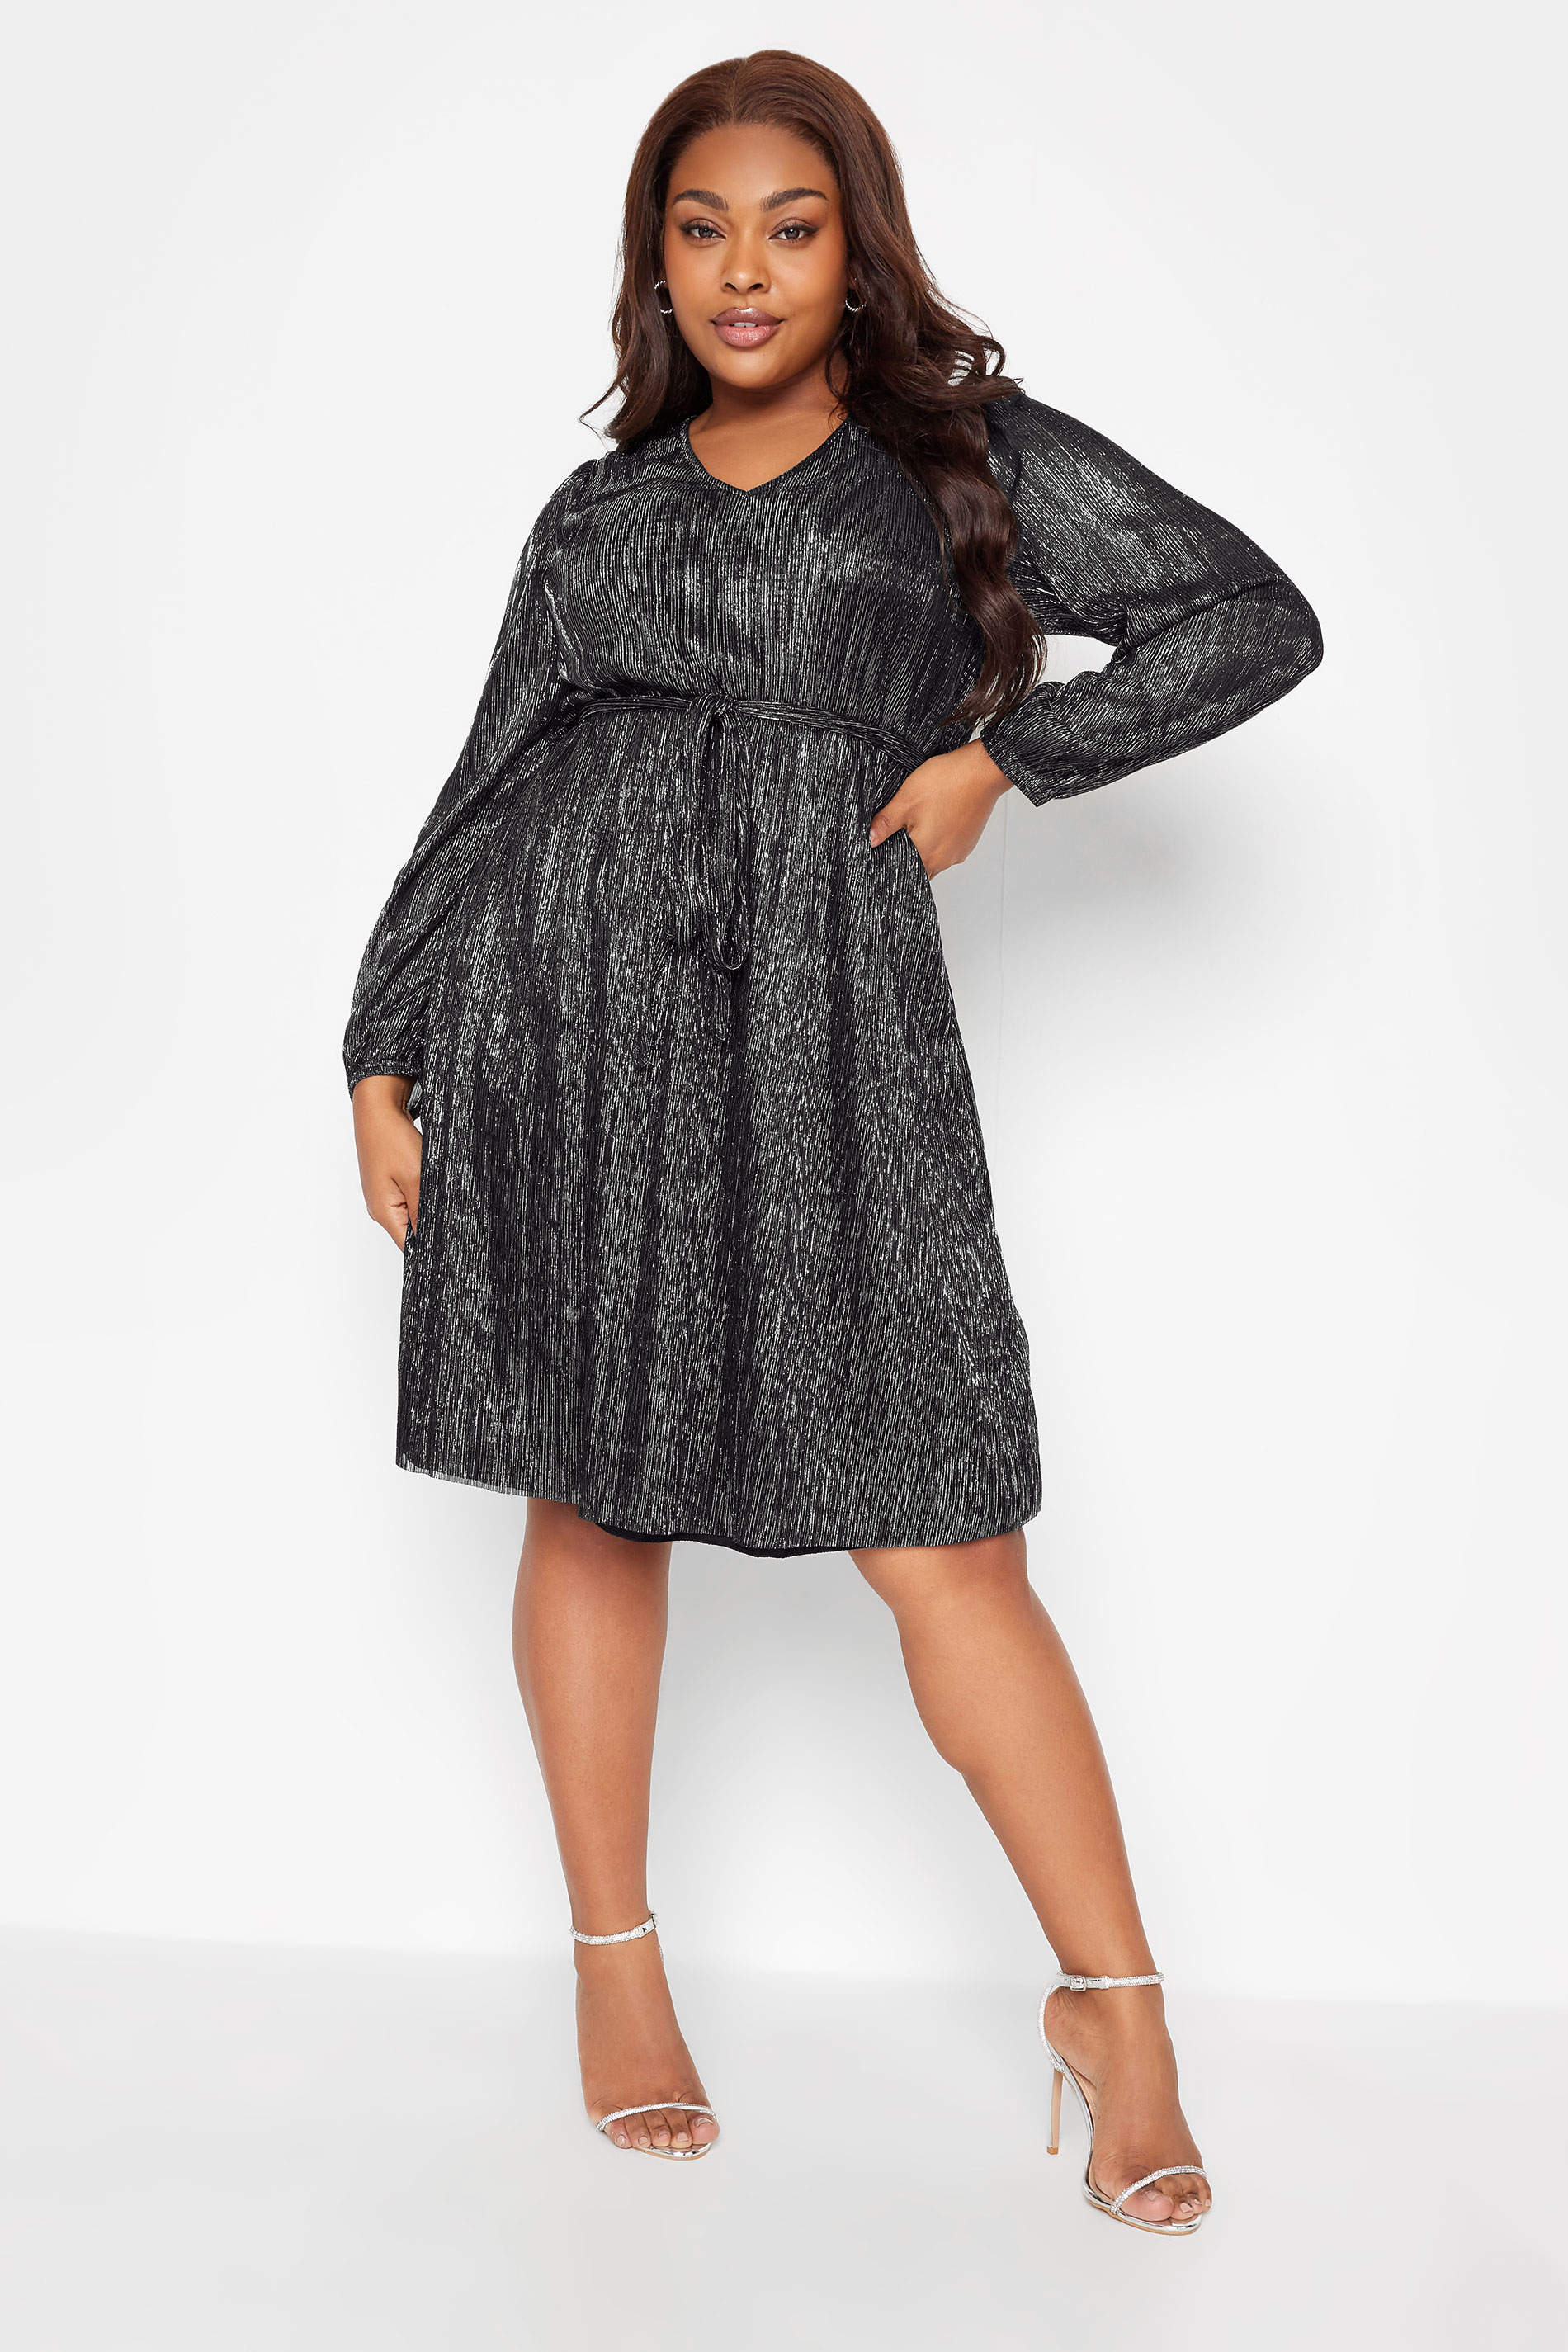 LIMITED COLLECTION Plus Size Black & Silver Crinkle Dress | Yours Clothing 1